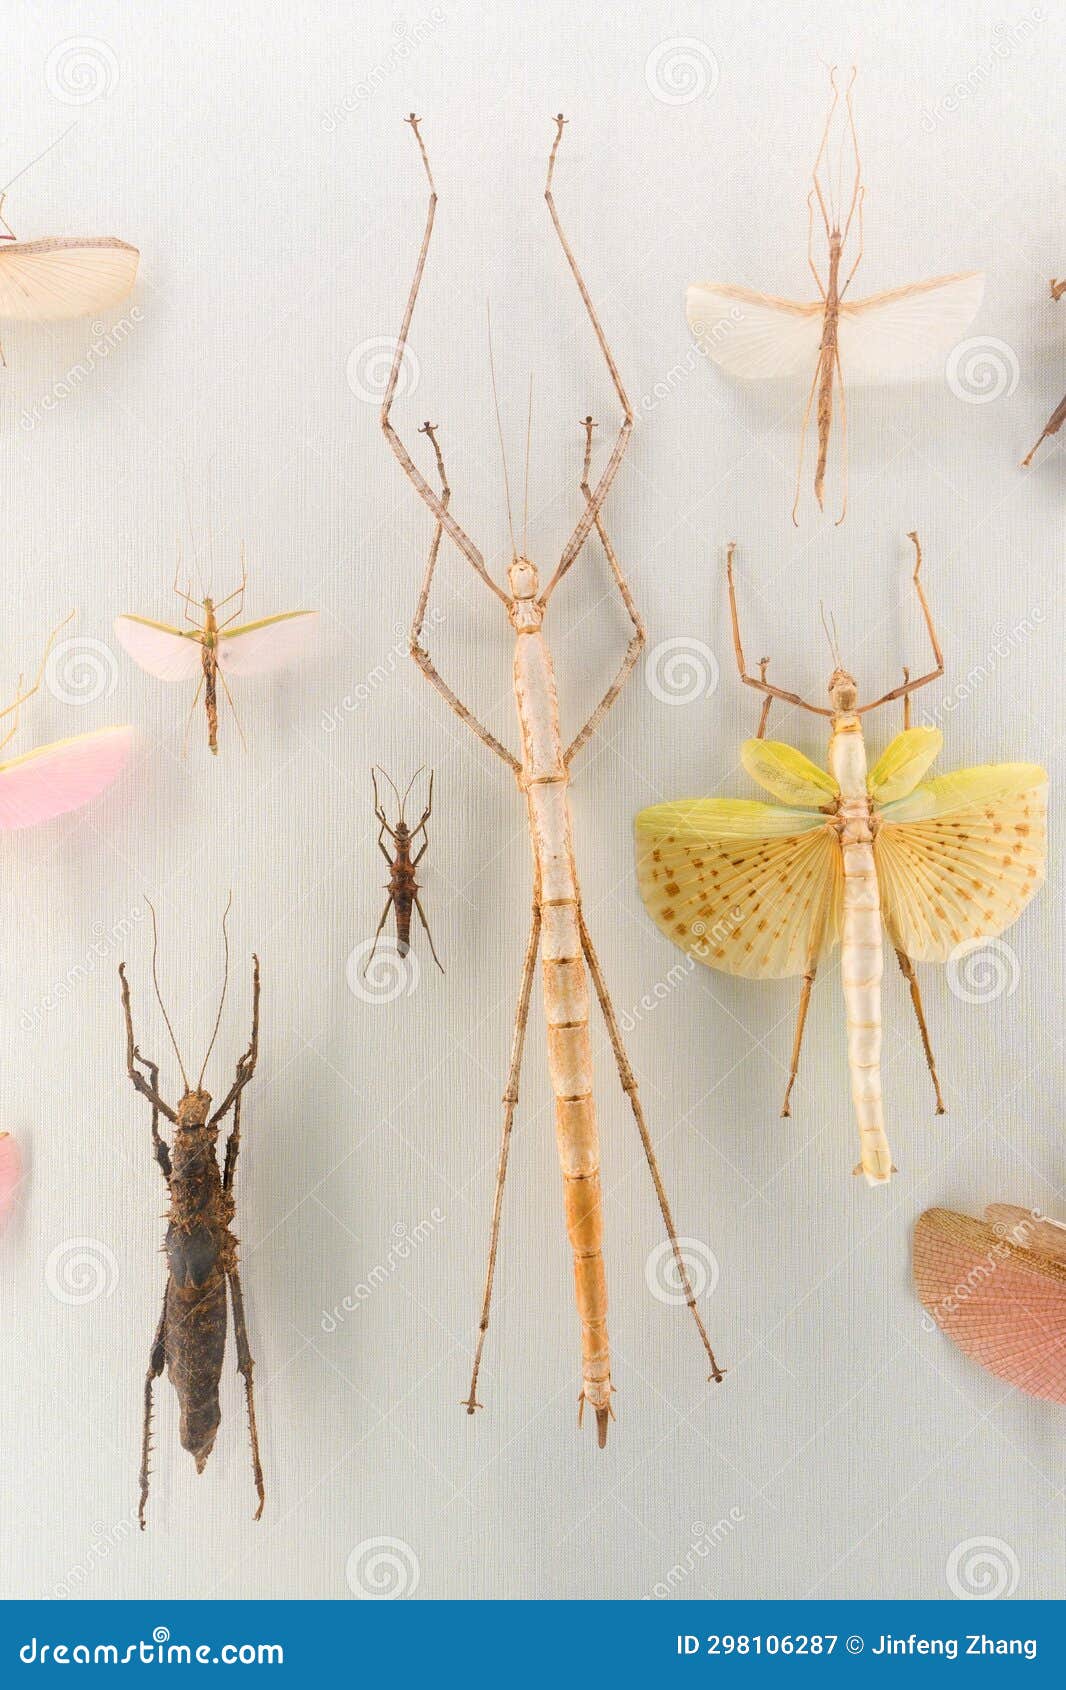 stick insect specimens